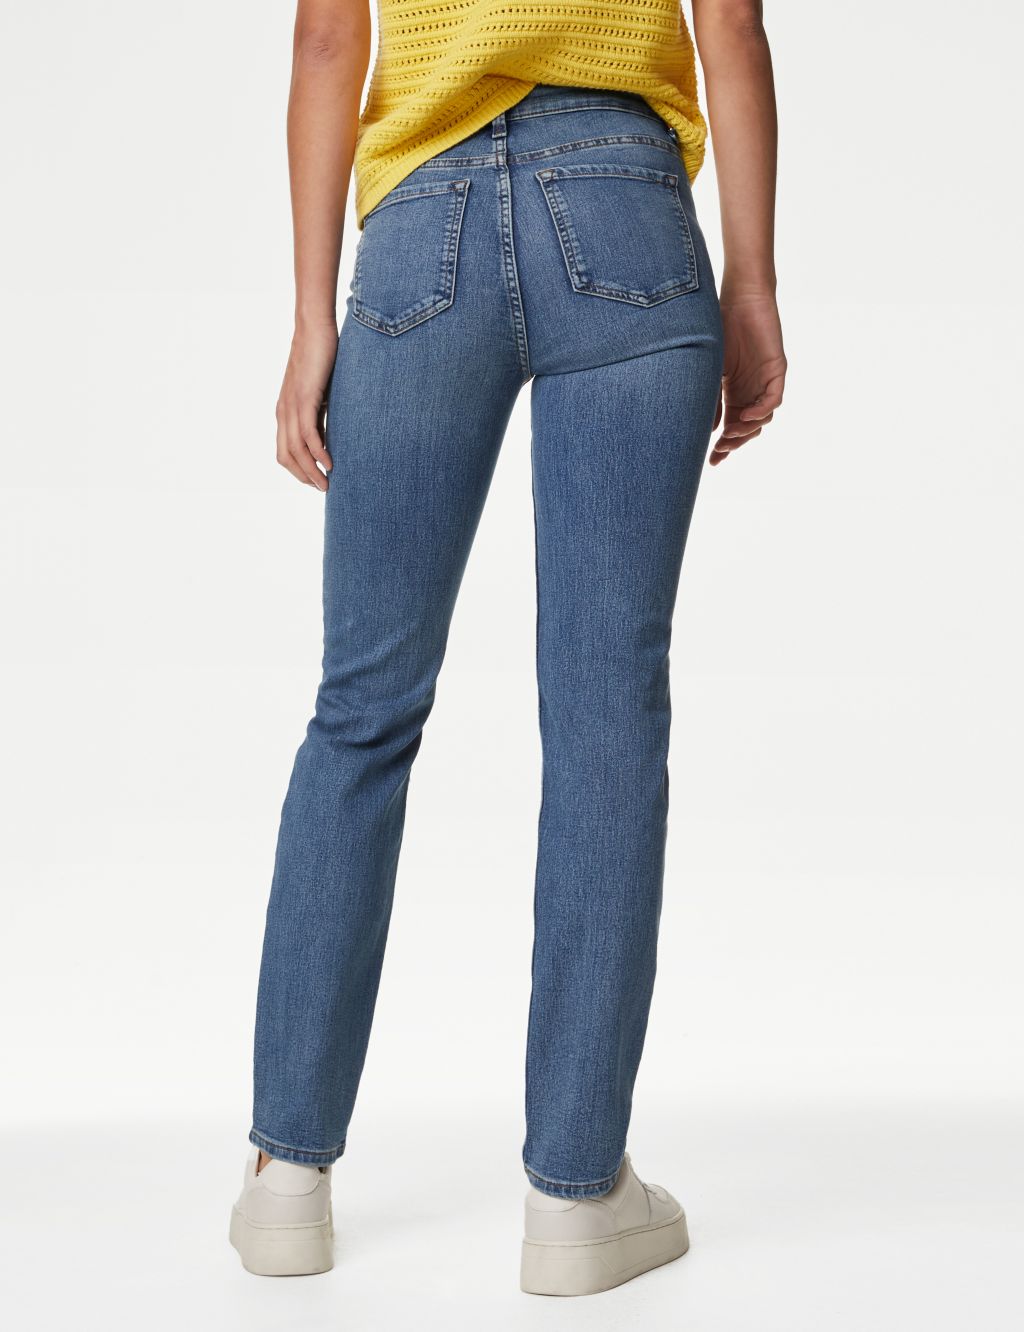 Sienna Straight Leg Jeans with Stretch image 5